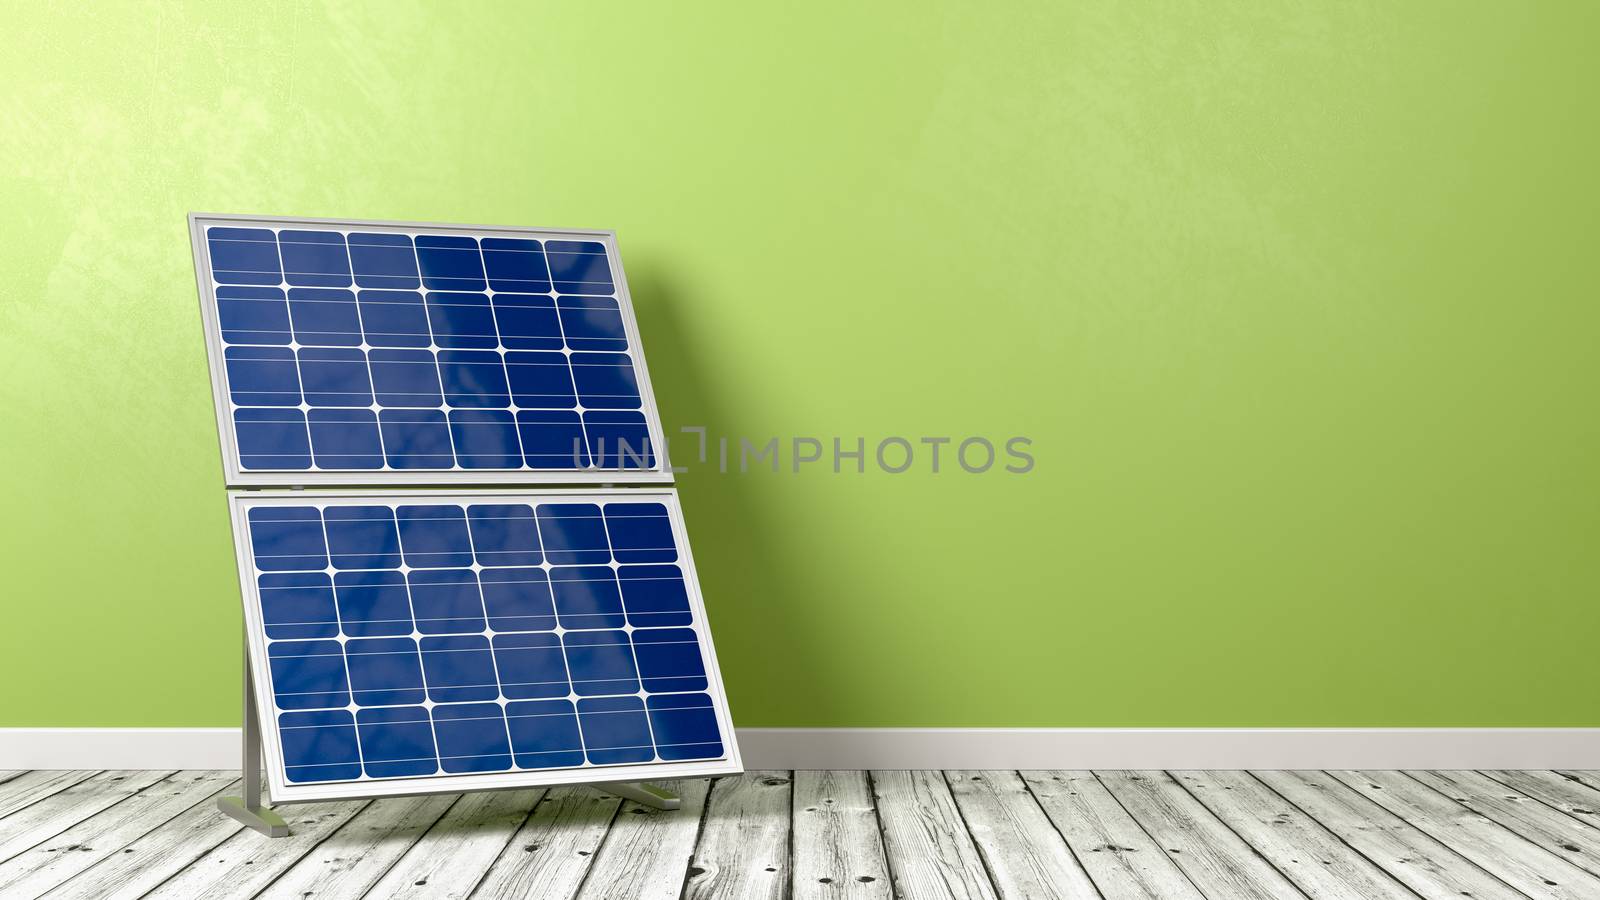 Solar Panel on Wooden Floor Against Wall by make